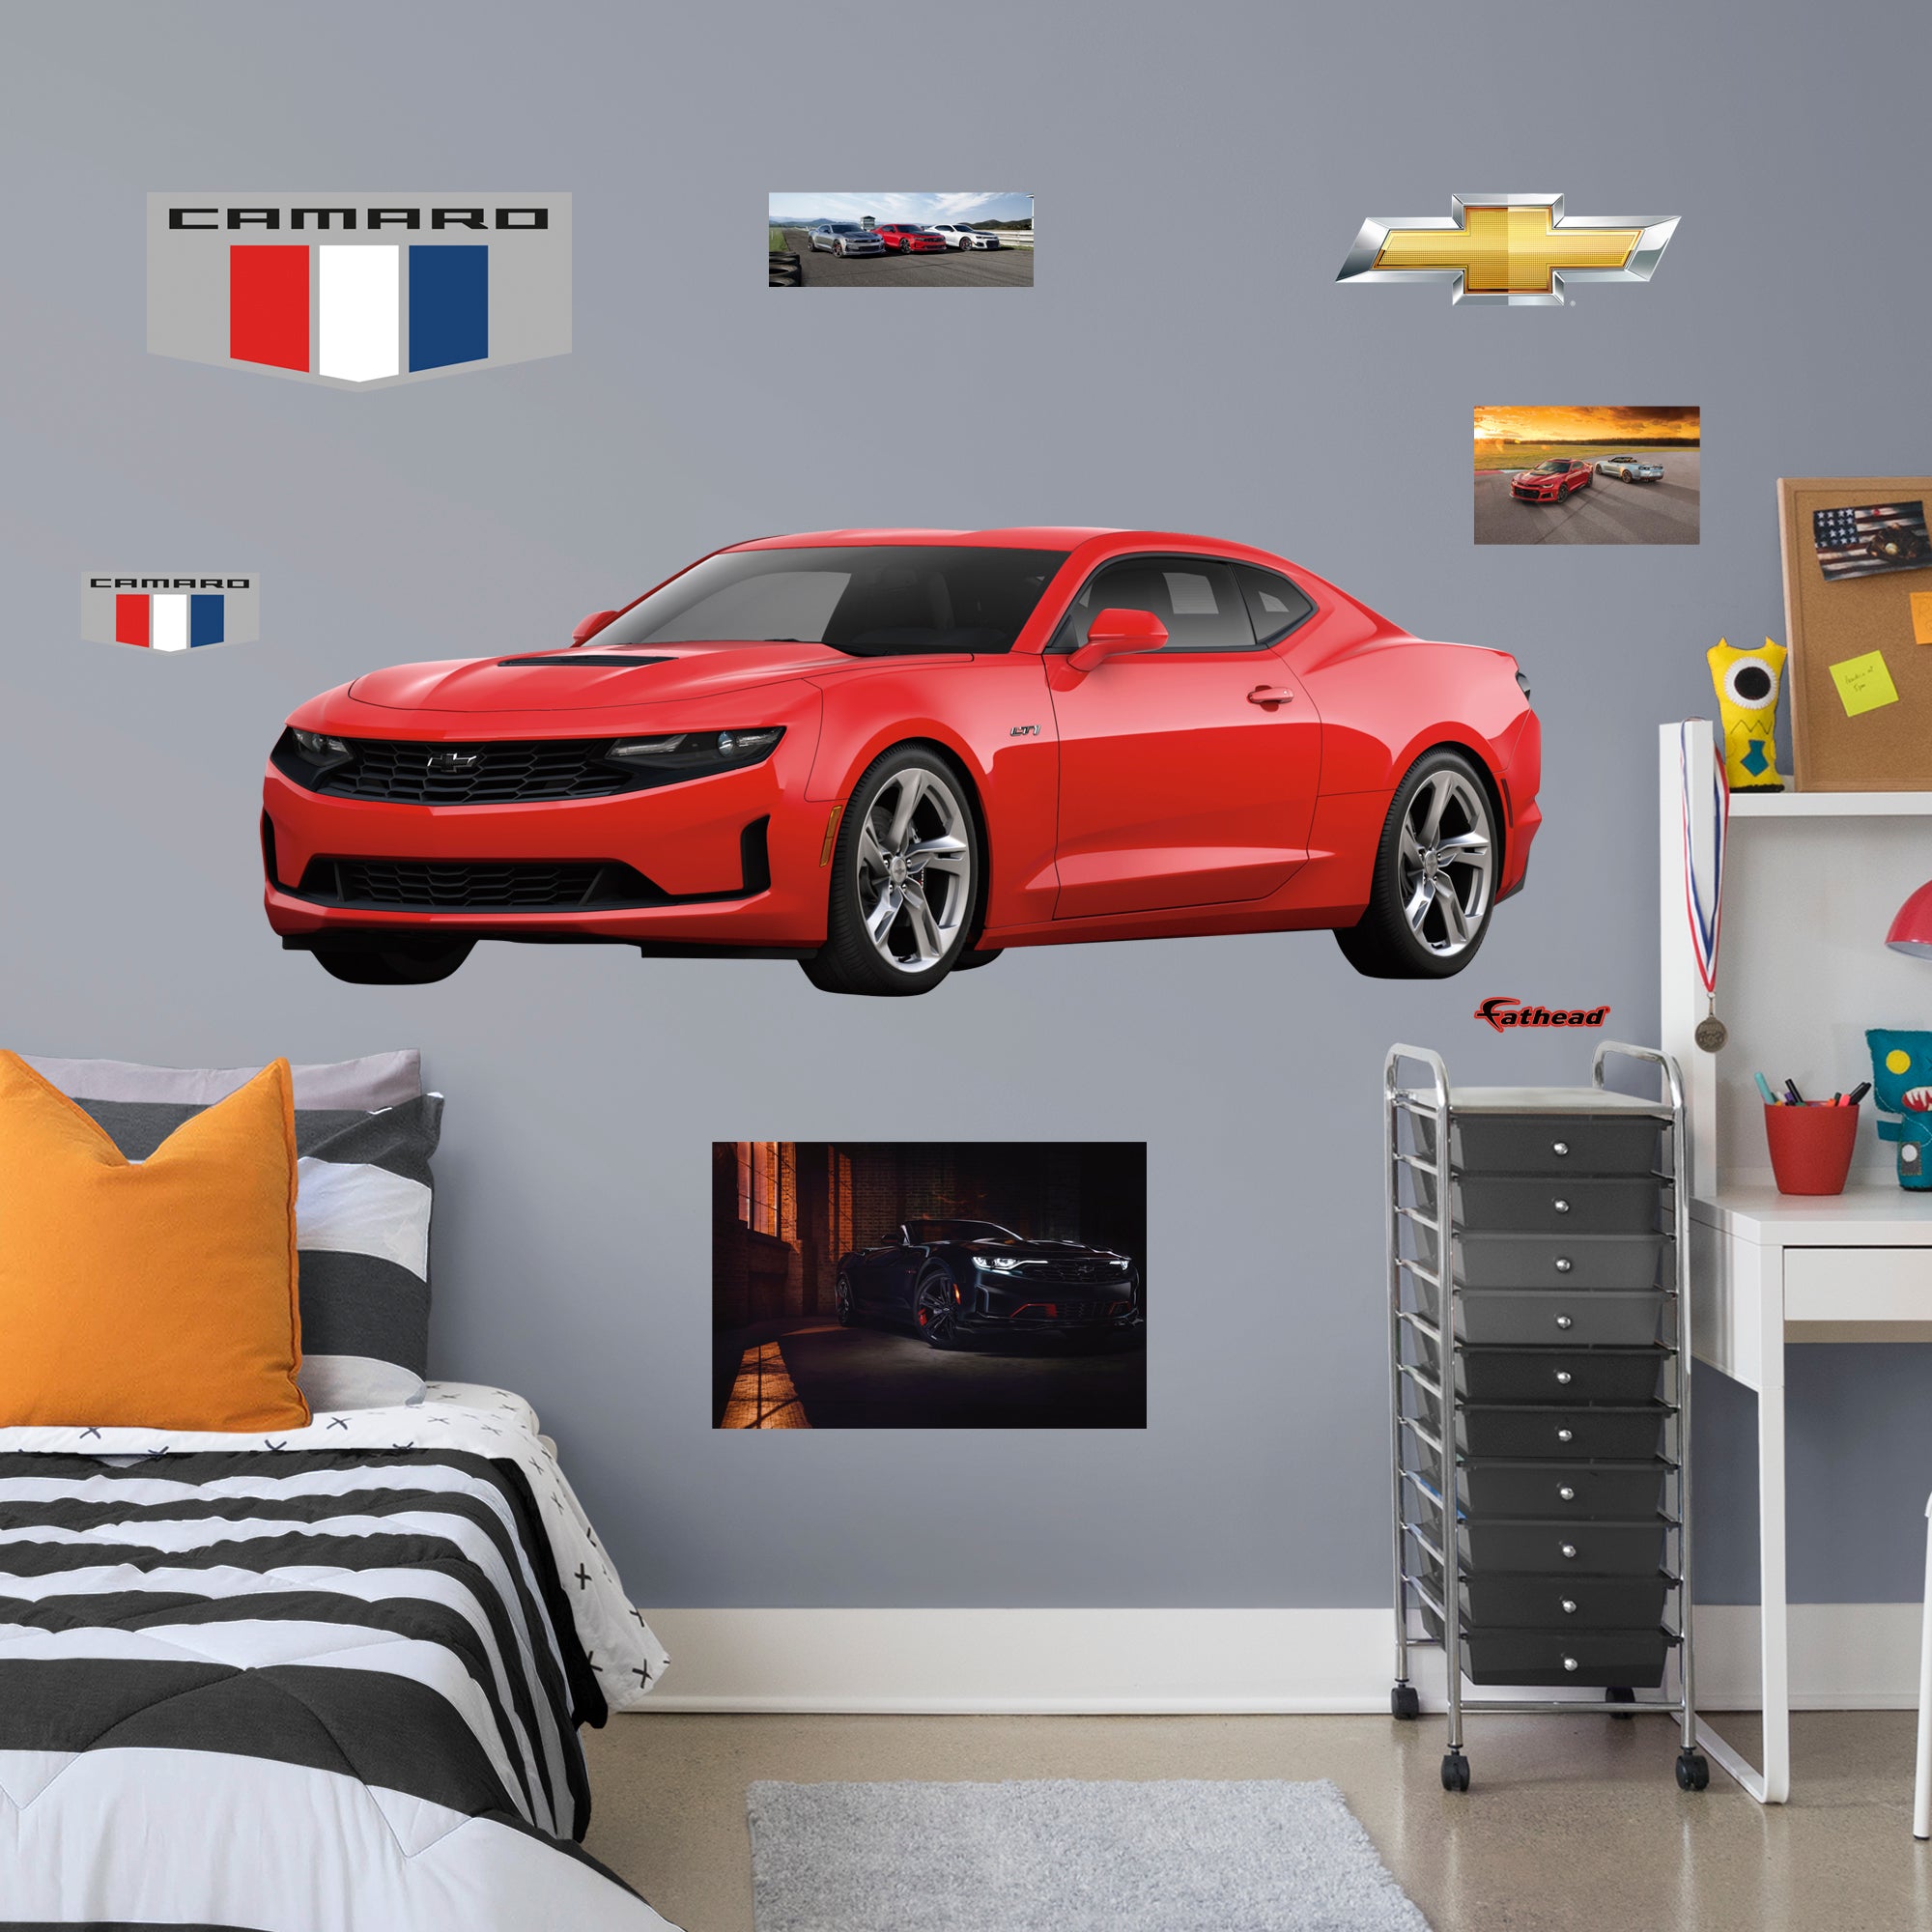 Chevrolet Red Camaro: Officially Licensed GM Removable Wall Decal Life-Size + 7 Decals by Fathead | Vinyl